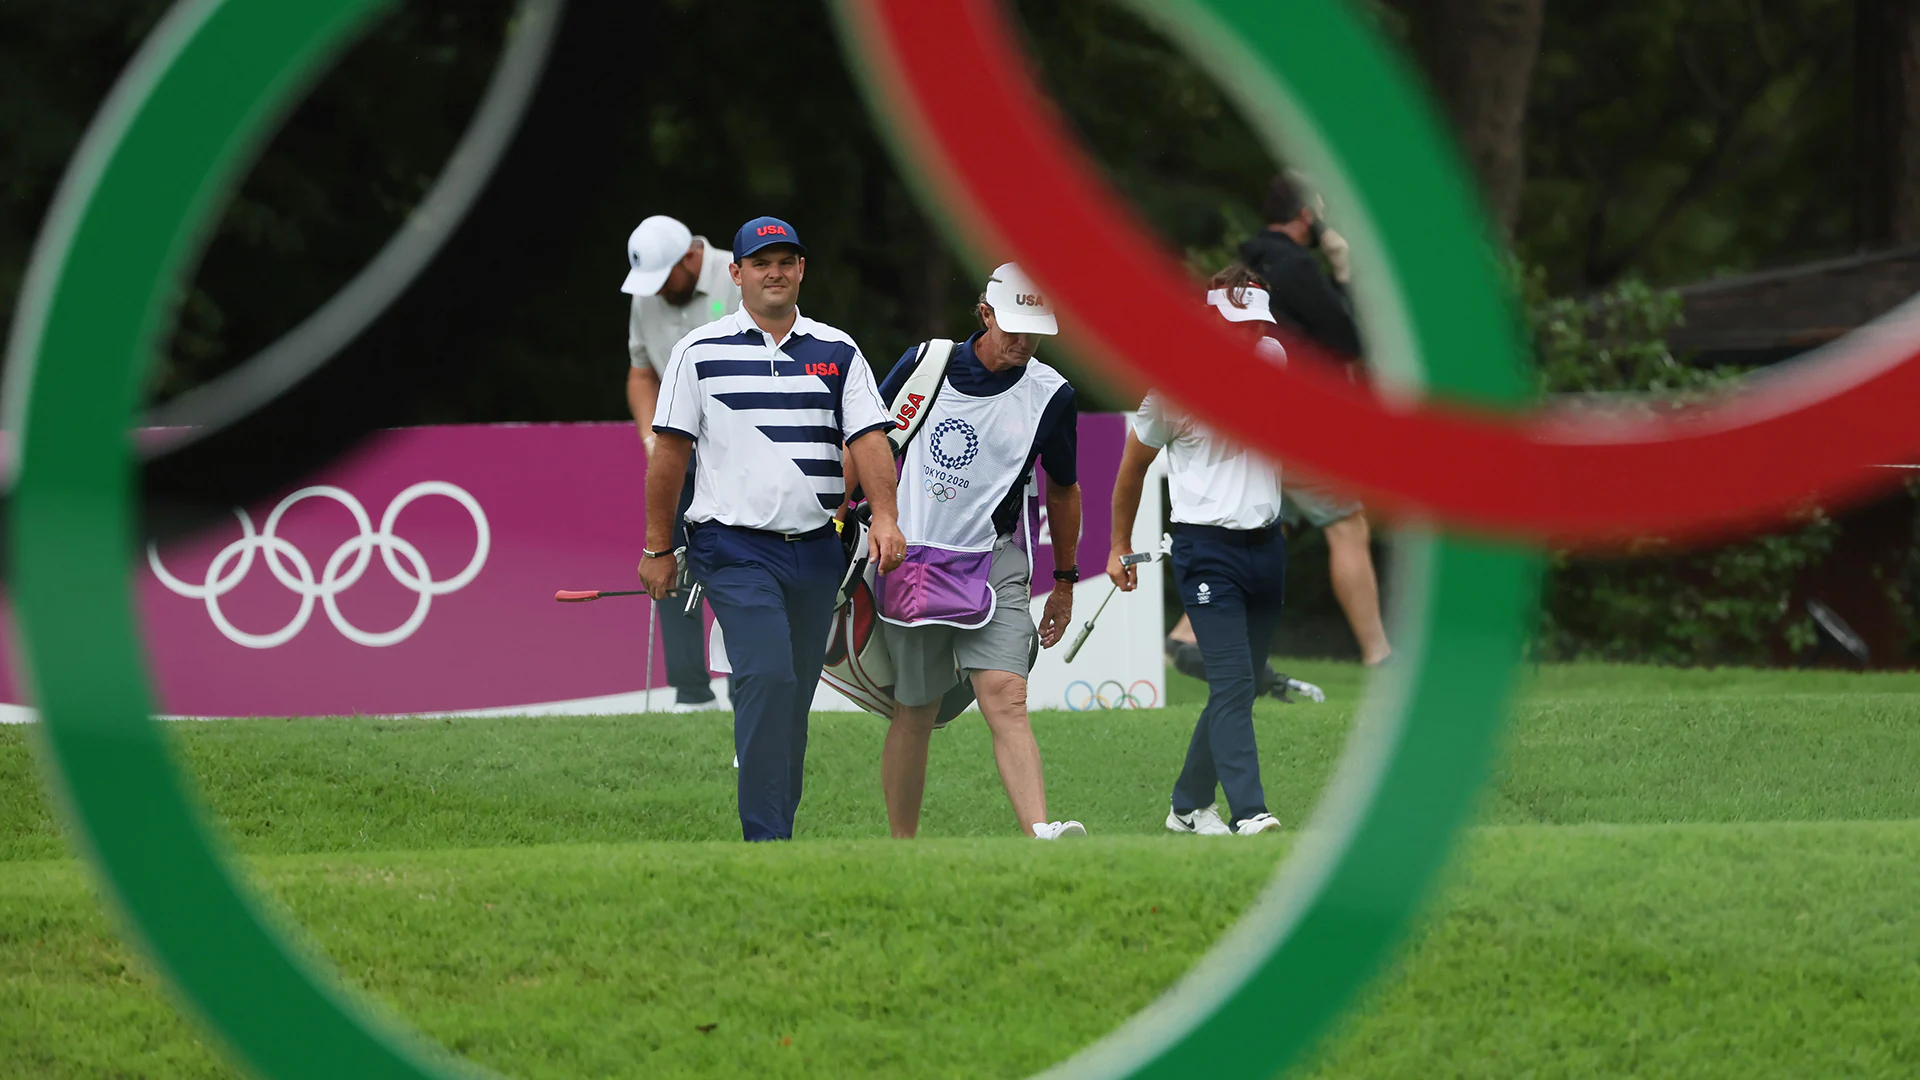 2021 Olympics: Patrick Reed shakes off delay, jetlag to card 68 in Olympics first round